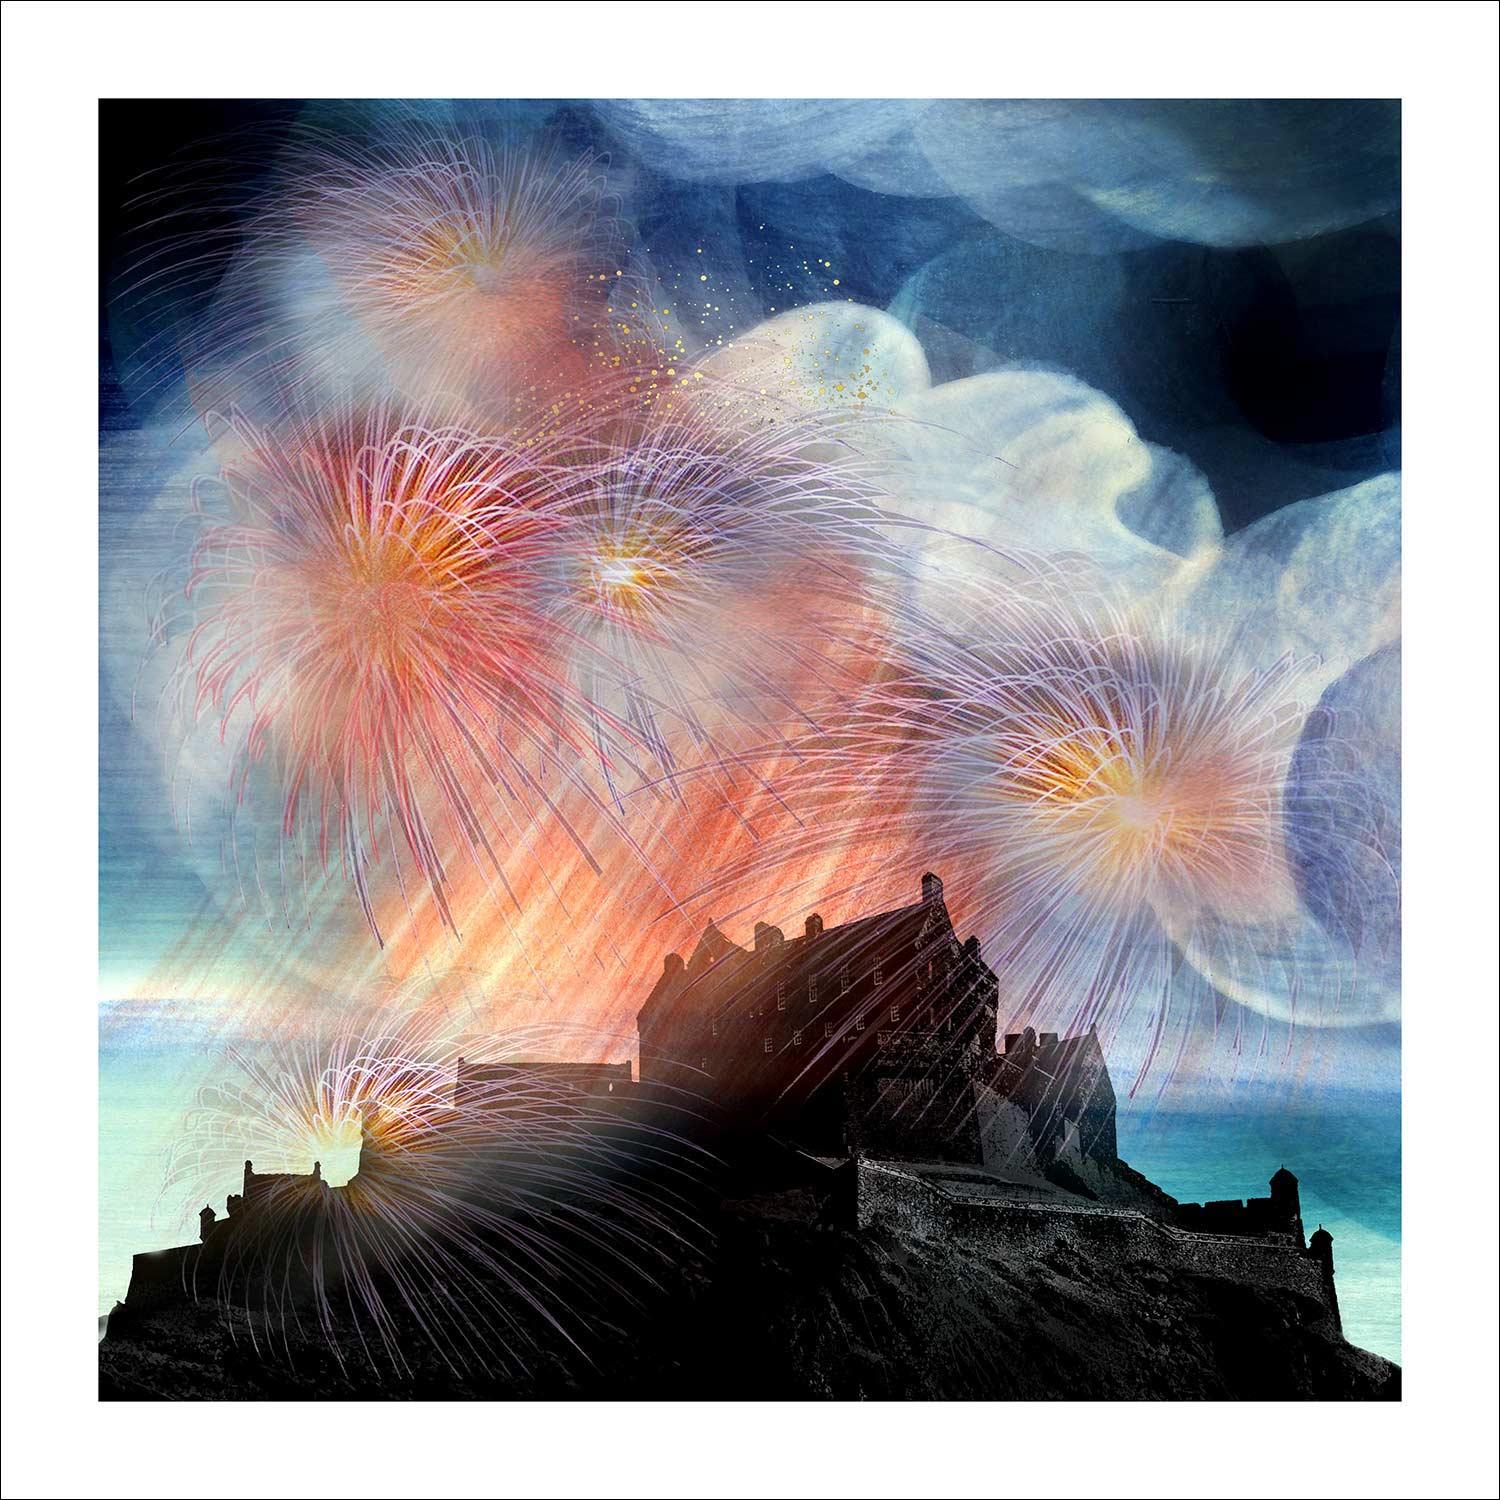 Festival Fireworks Art Print from an original painting by artist Esther Cohen